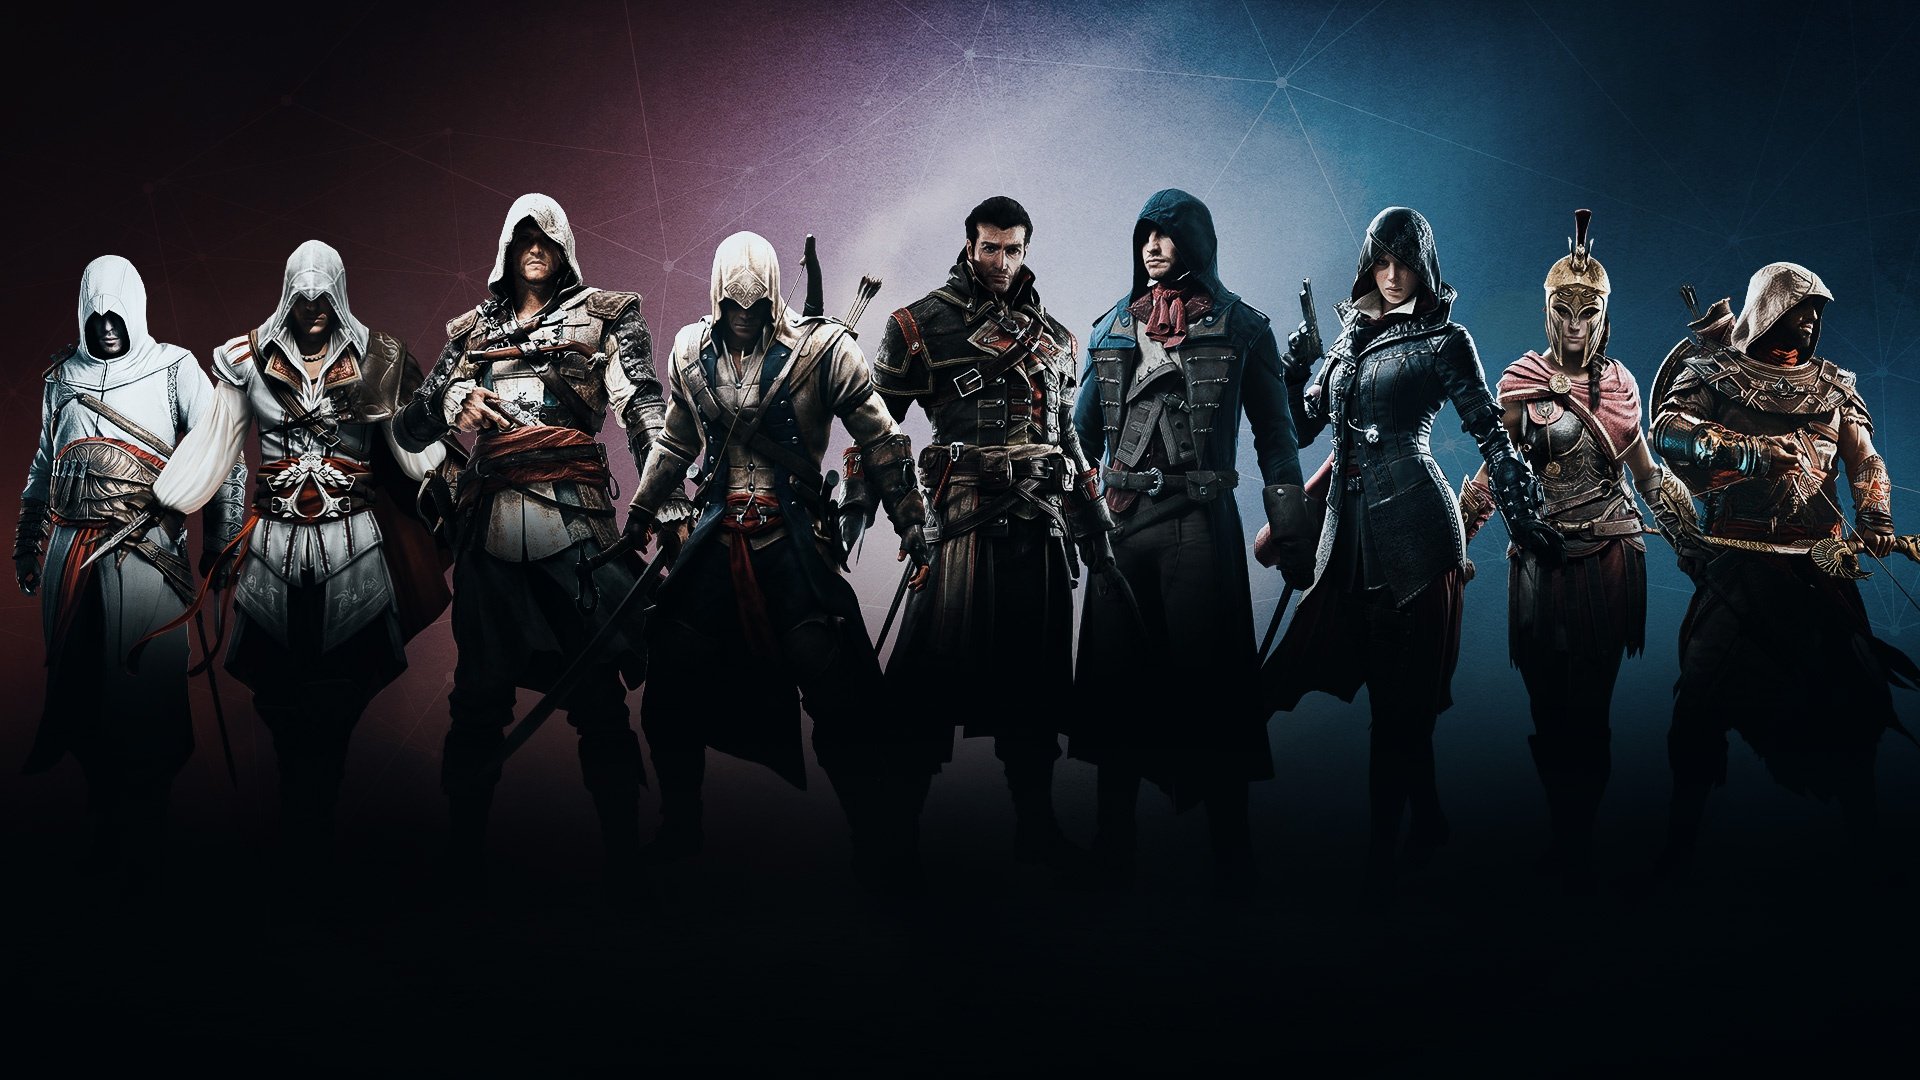 Sharpen help In detail Assassin's Creed history: The full story (so far) | Windows Central